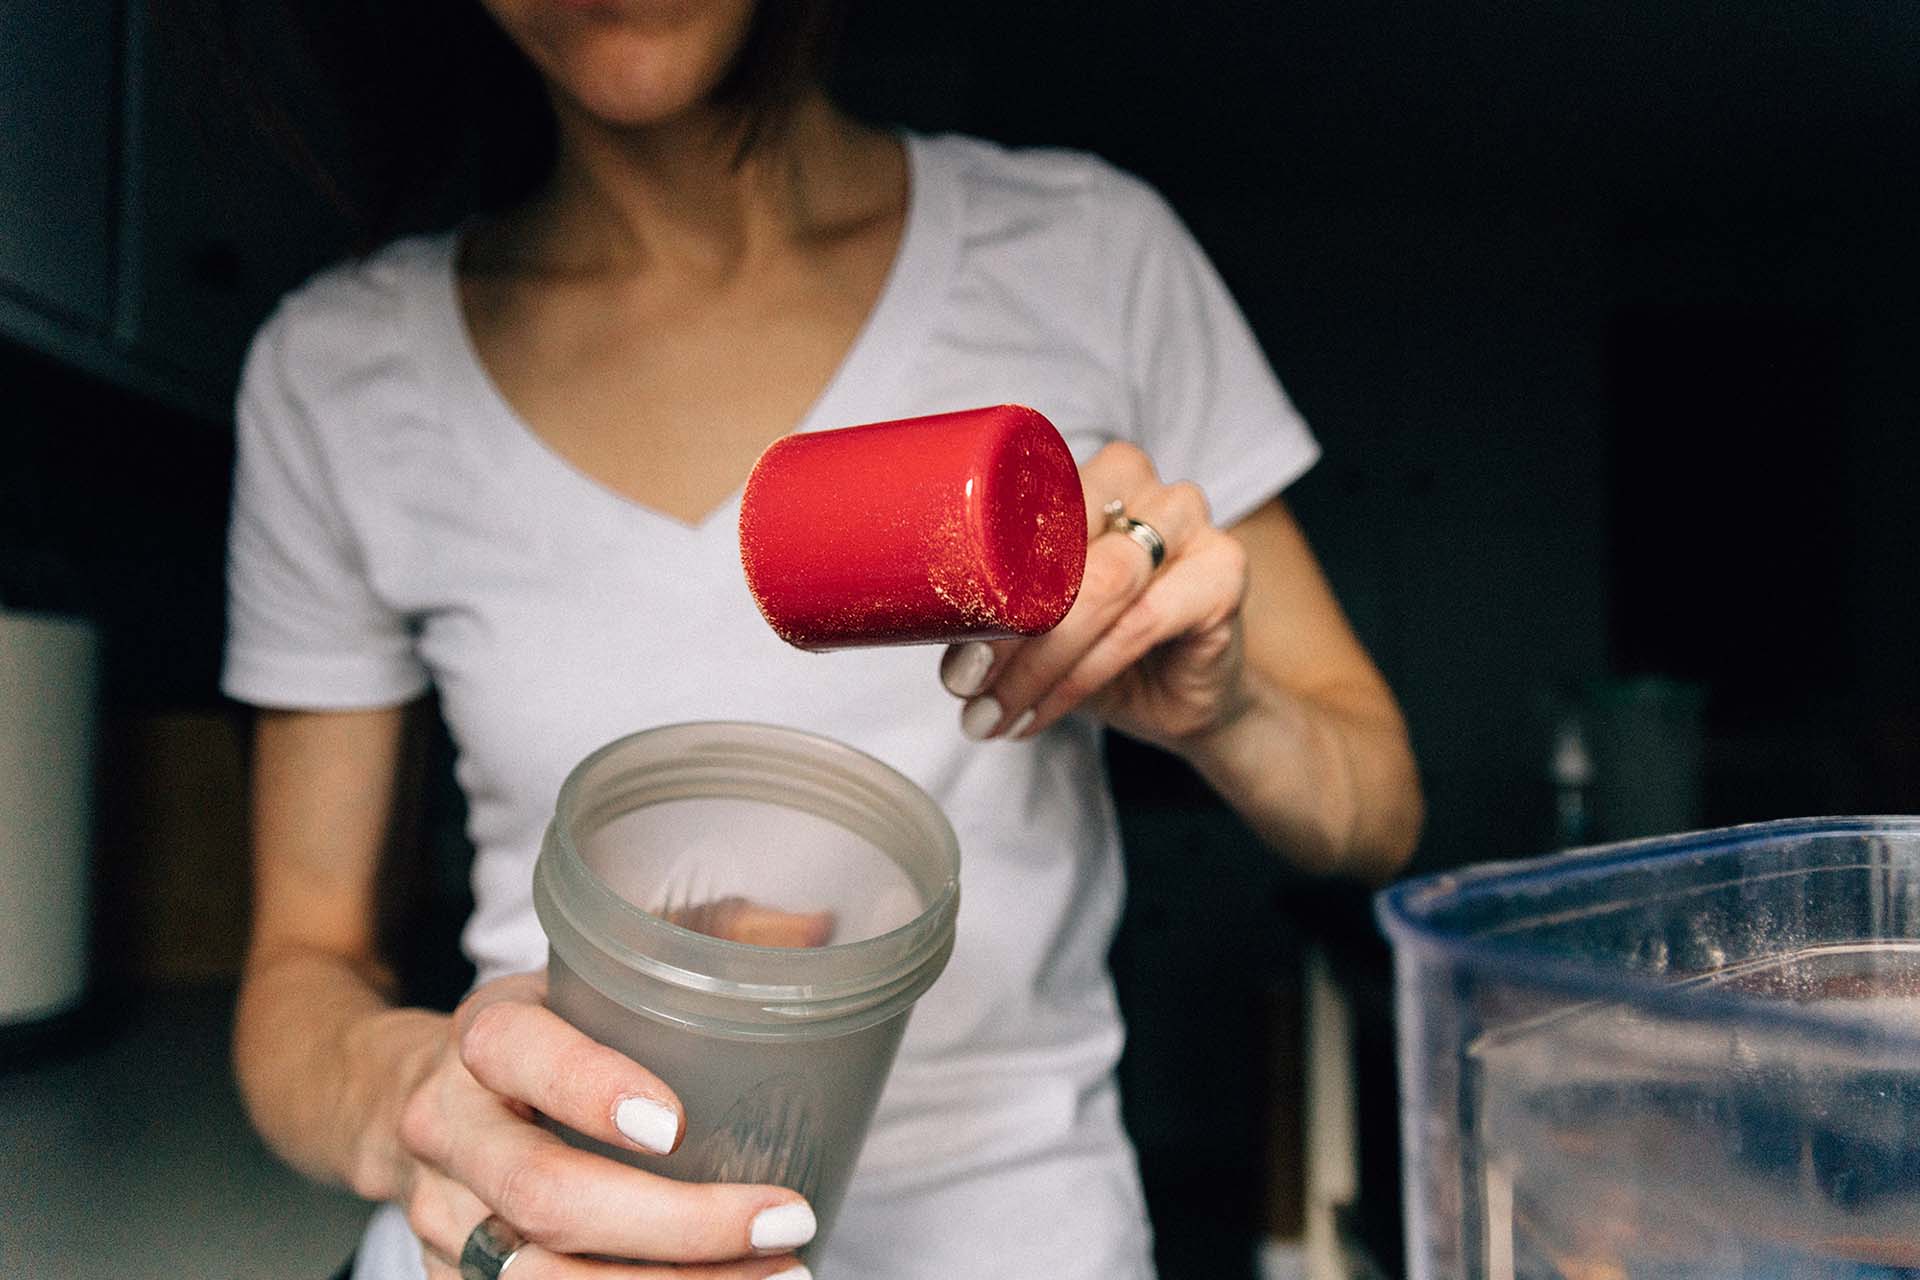 What Will Happen If You Drink Protein Shakes Without Working Out?